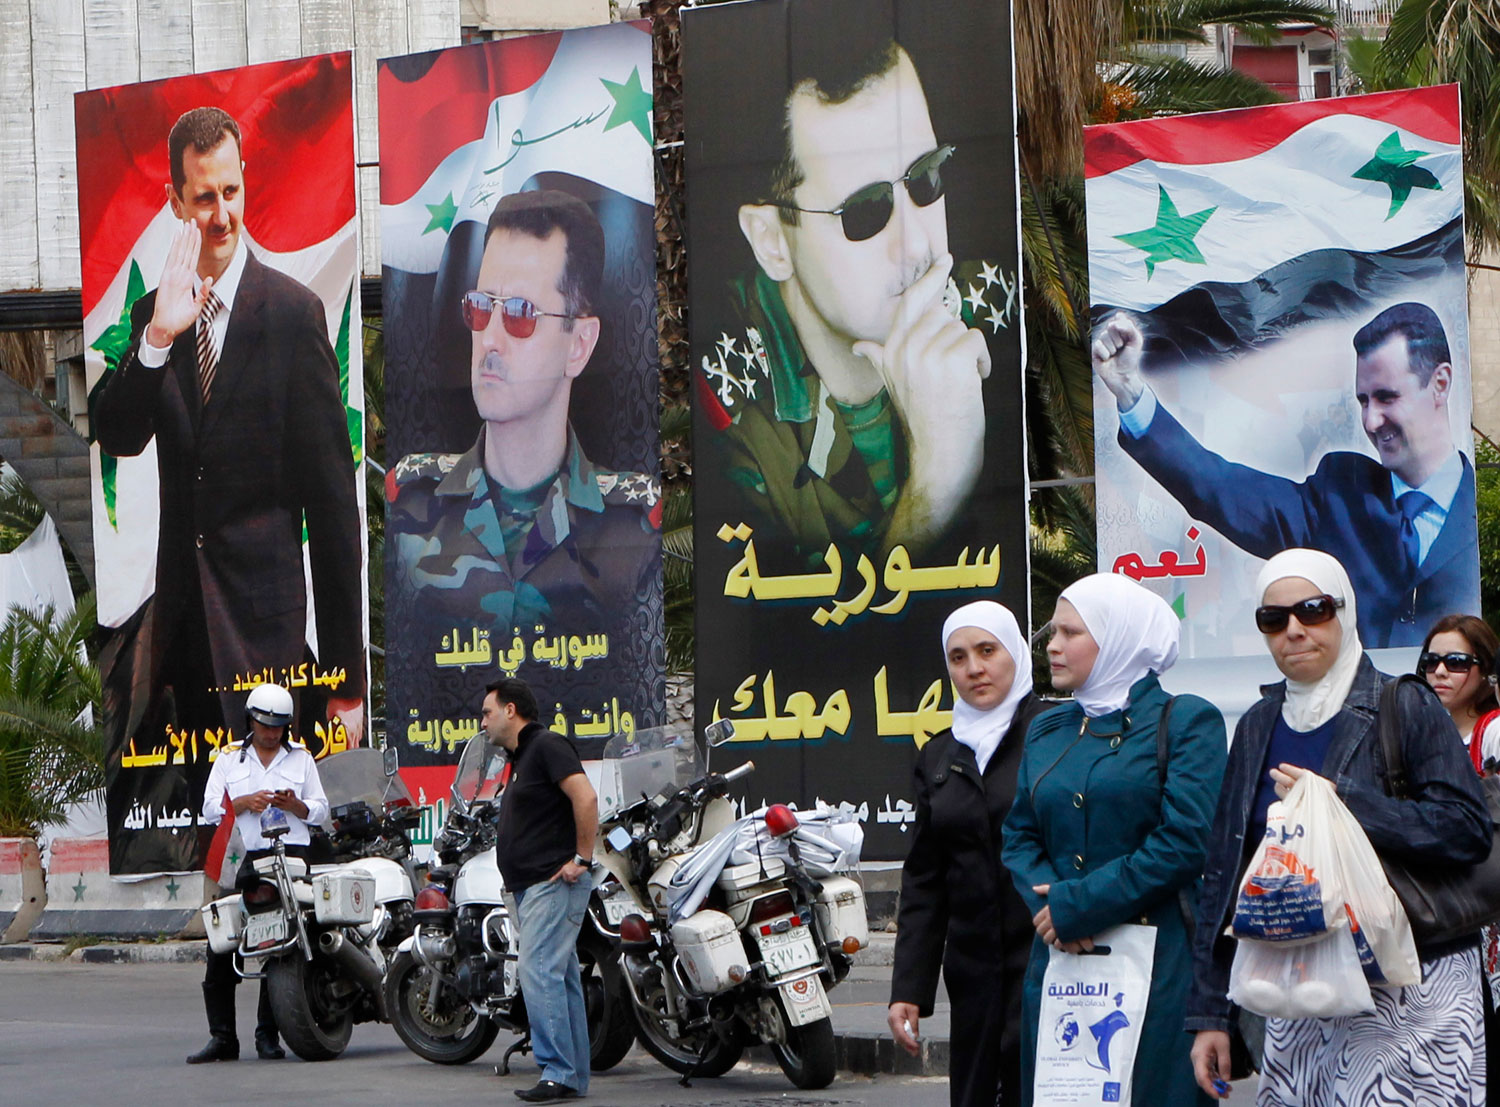 Women walk past election posters of Syria's President Bashar al-Assad along a street in Damascus